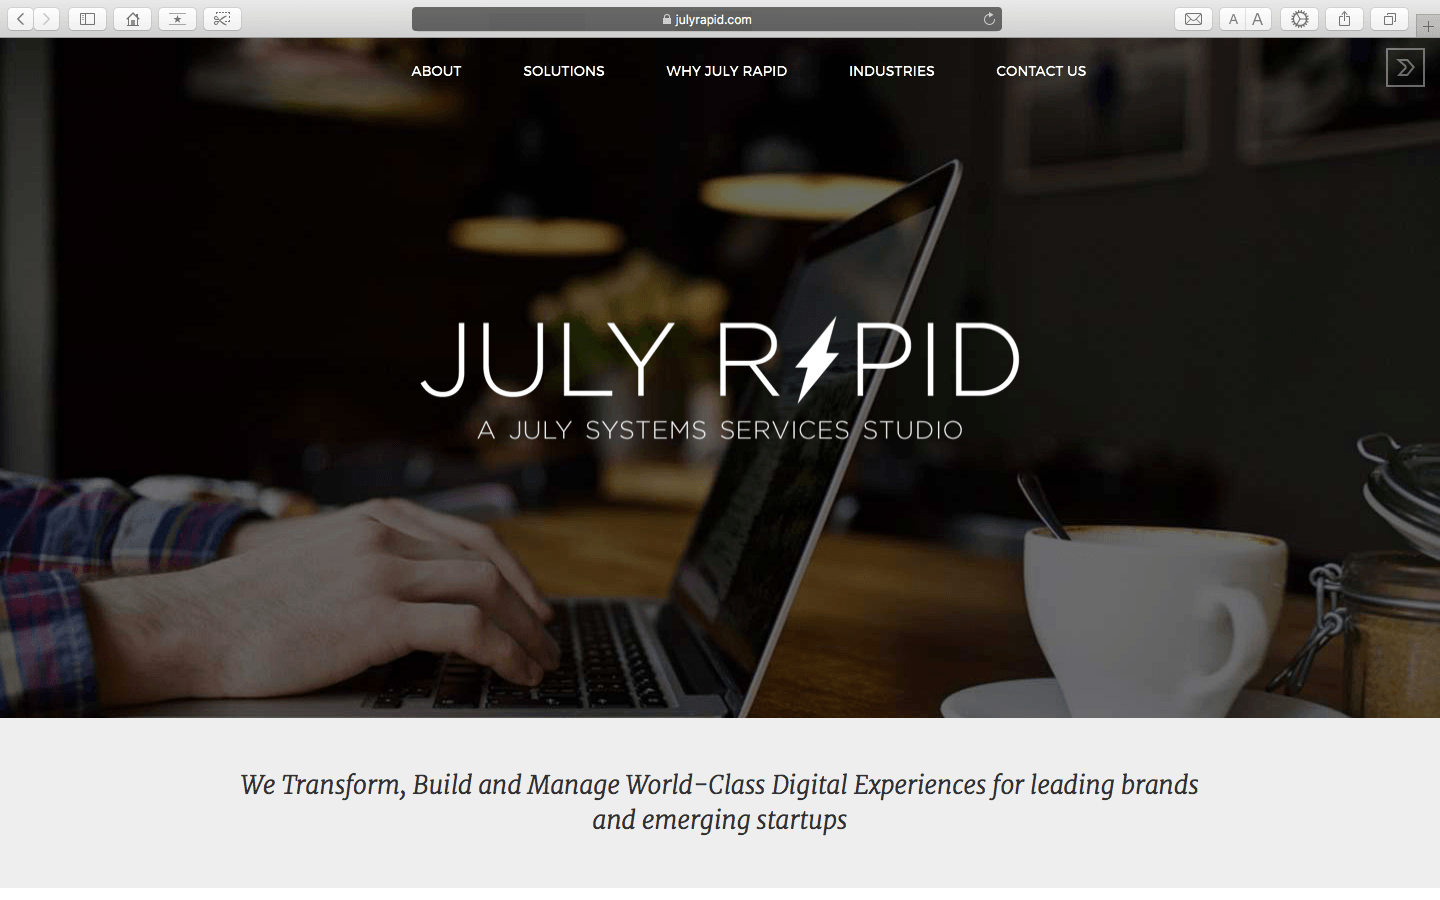 July Rapid Top 10 Mobile App Development Company in USA